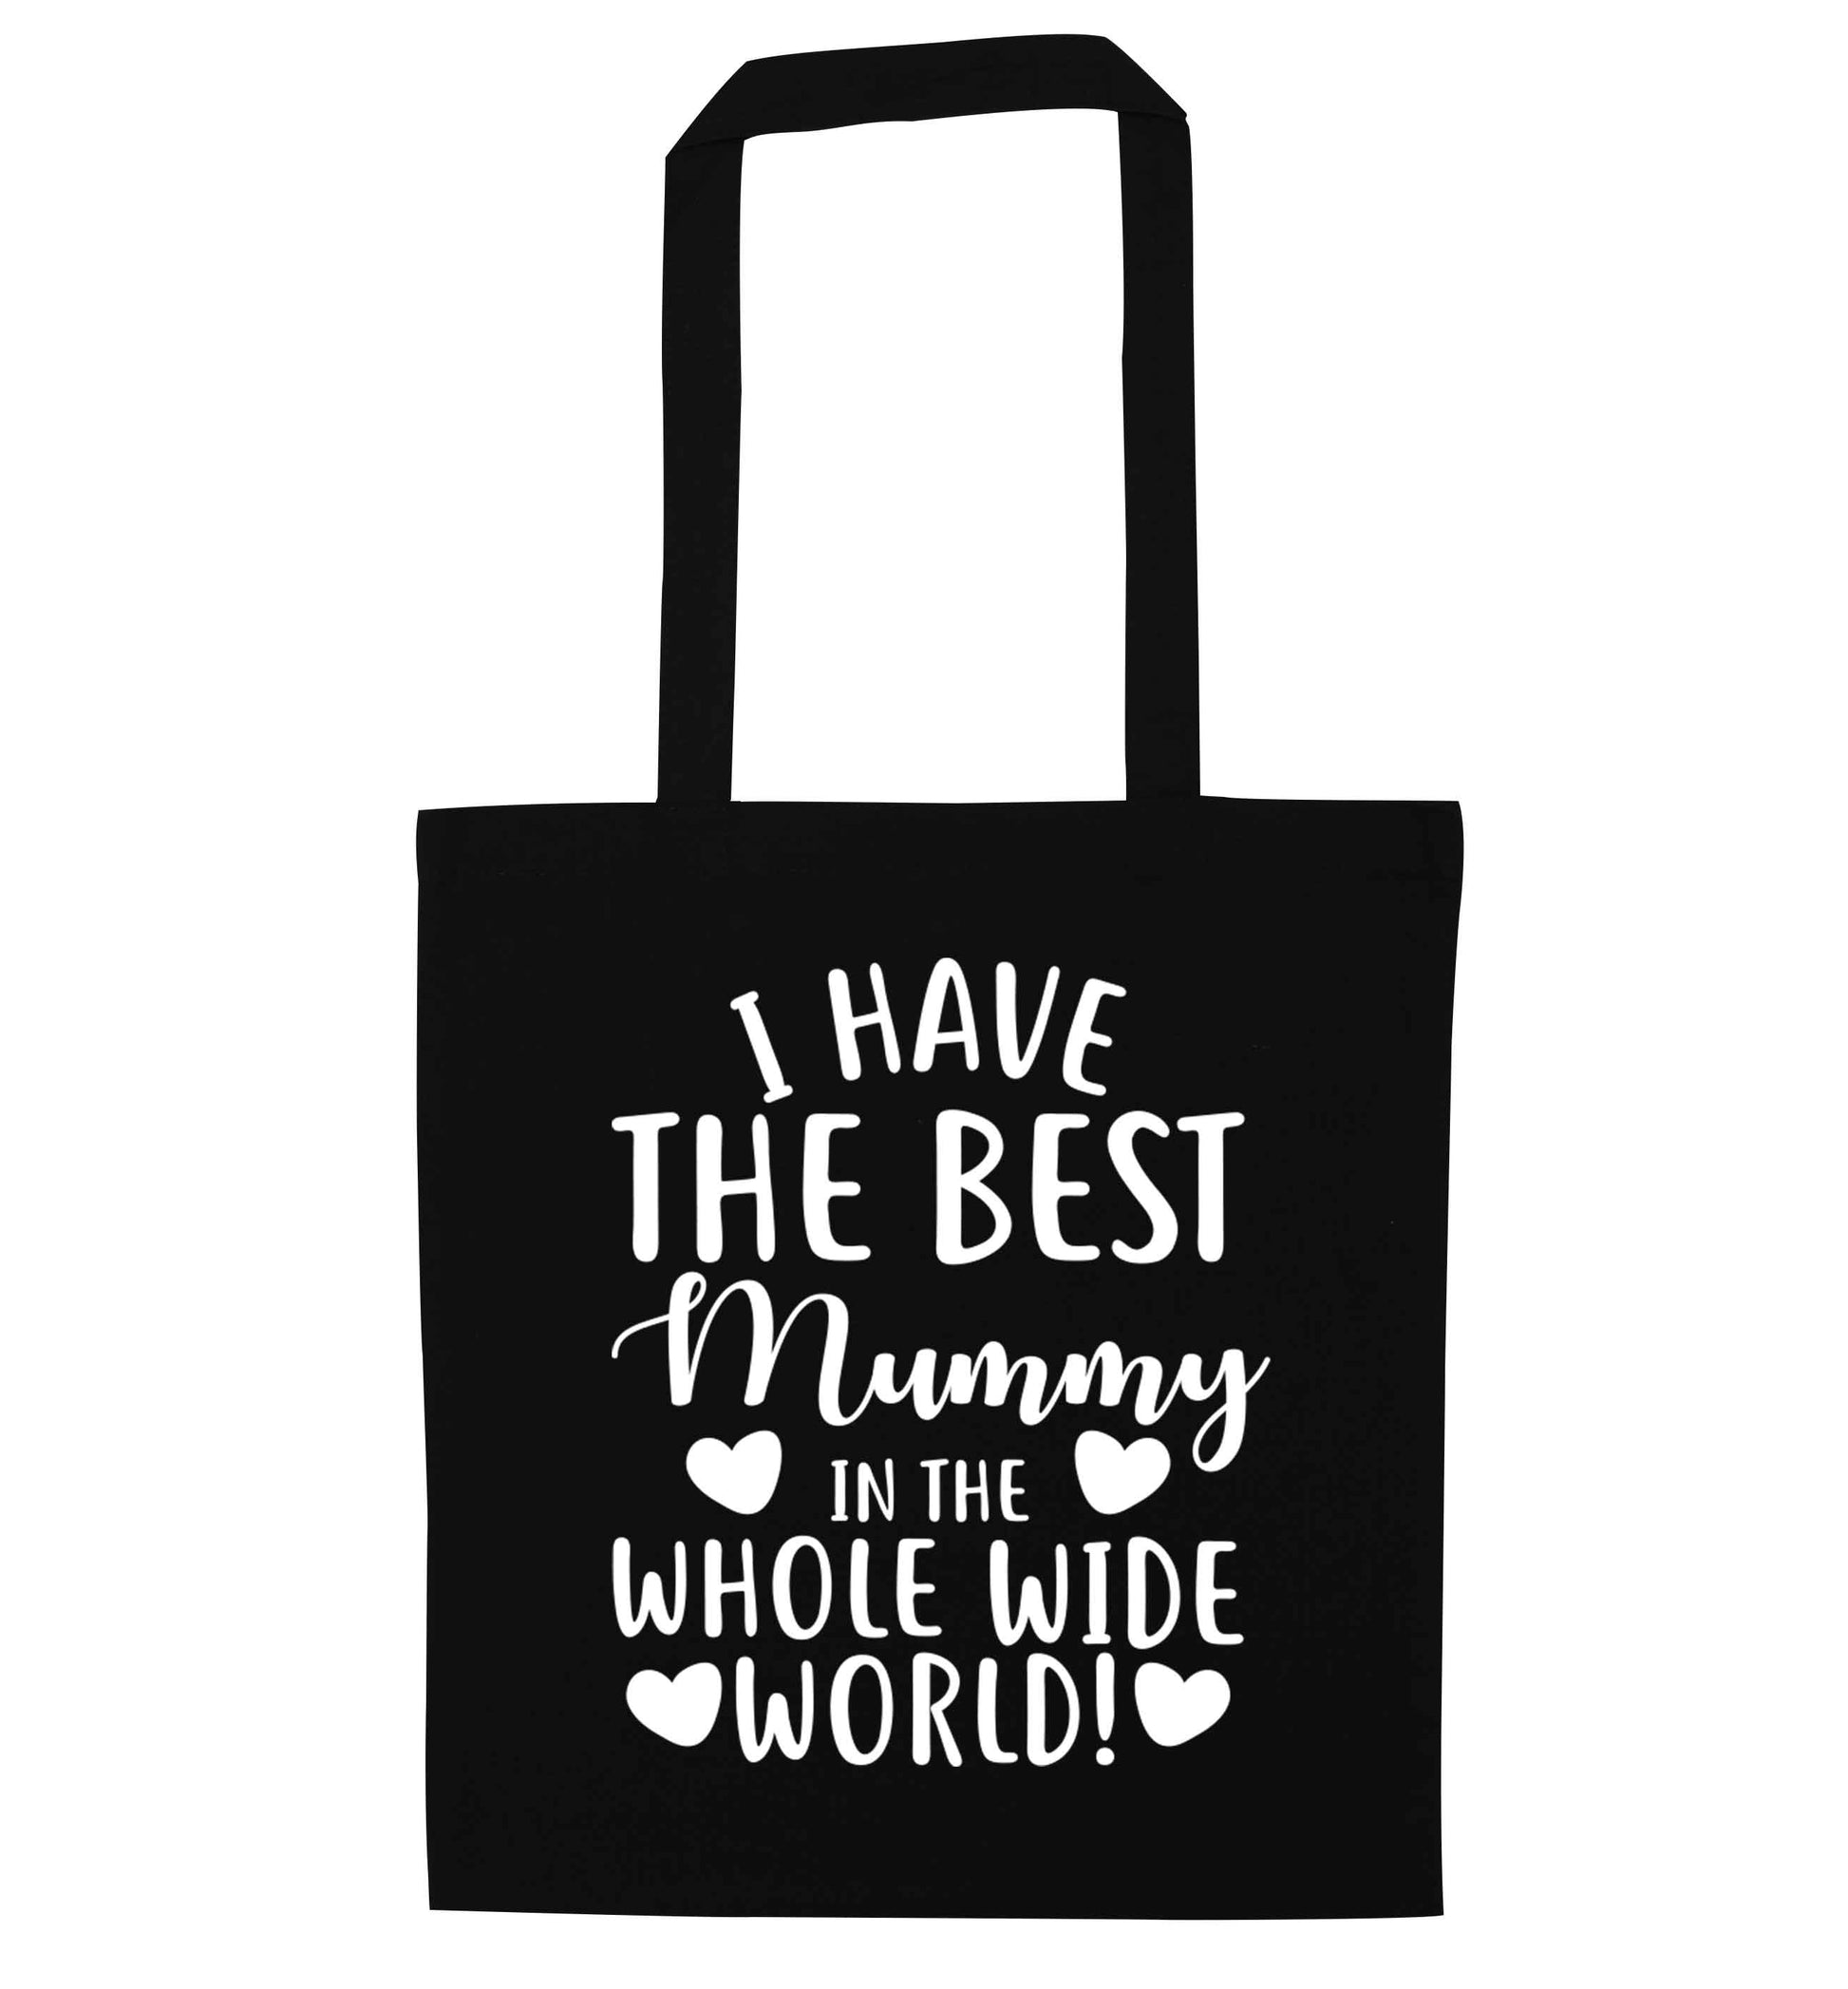 I have the best mummy in the whole wide world black tote bag